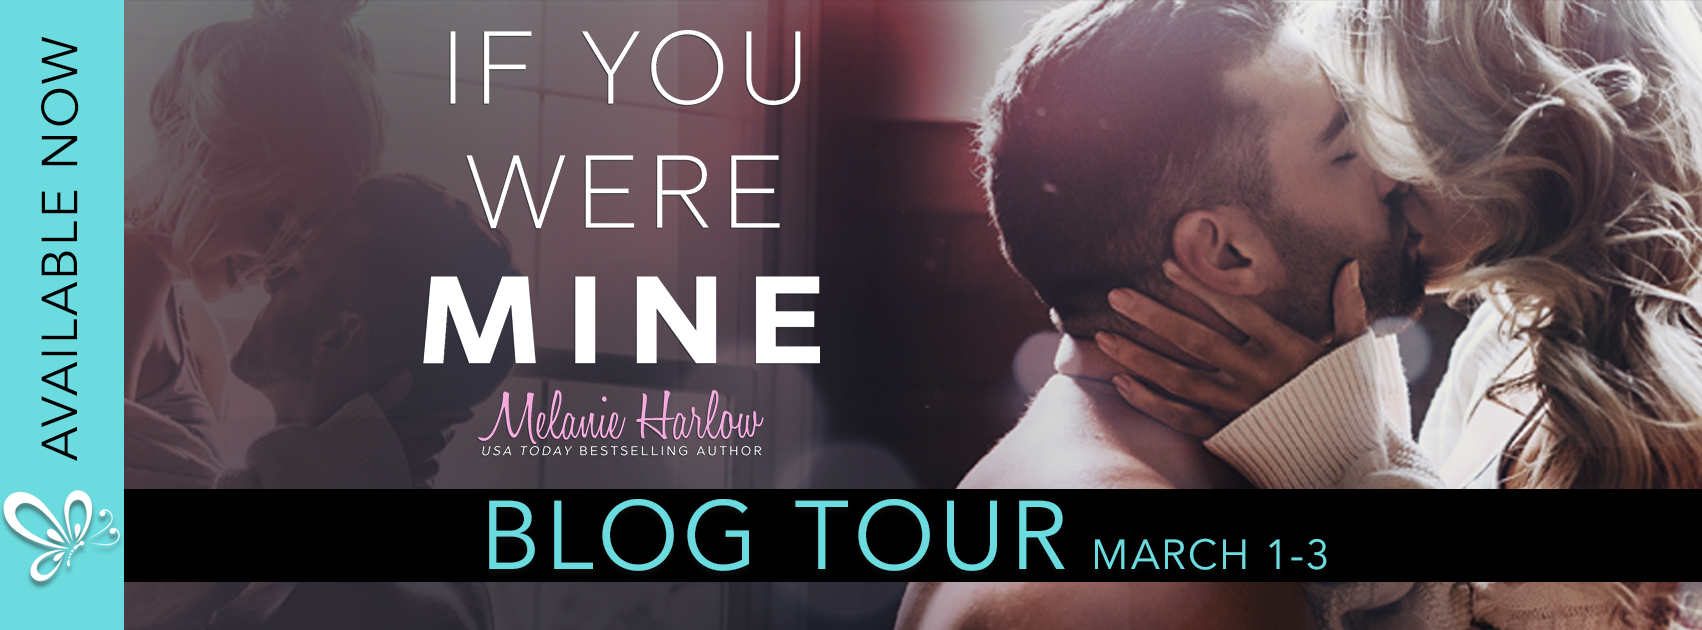 Review of If You Were Mine by Melanie Harlow